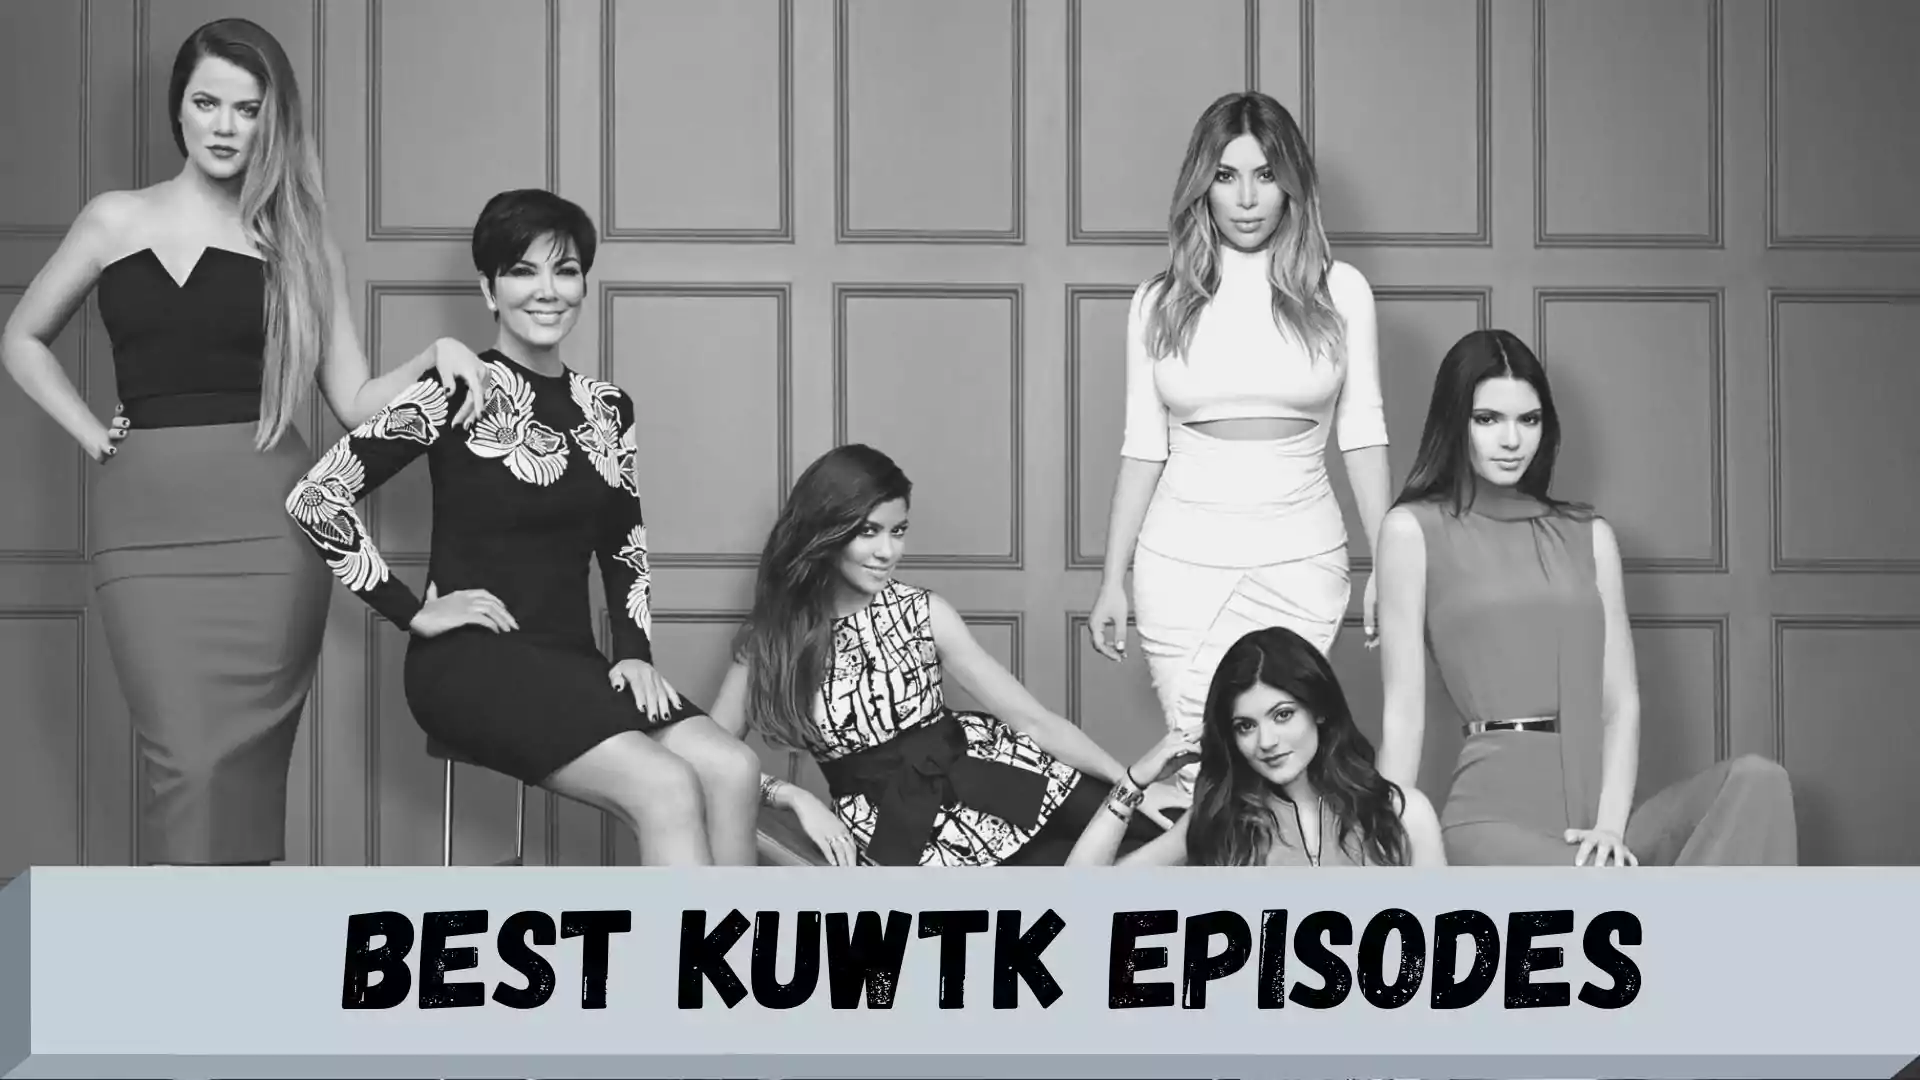 Best KUWTK Episodes Wallpaper and images